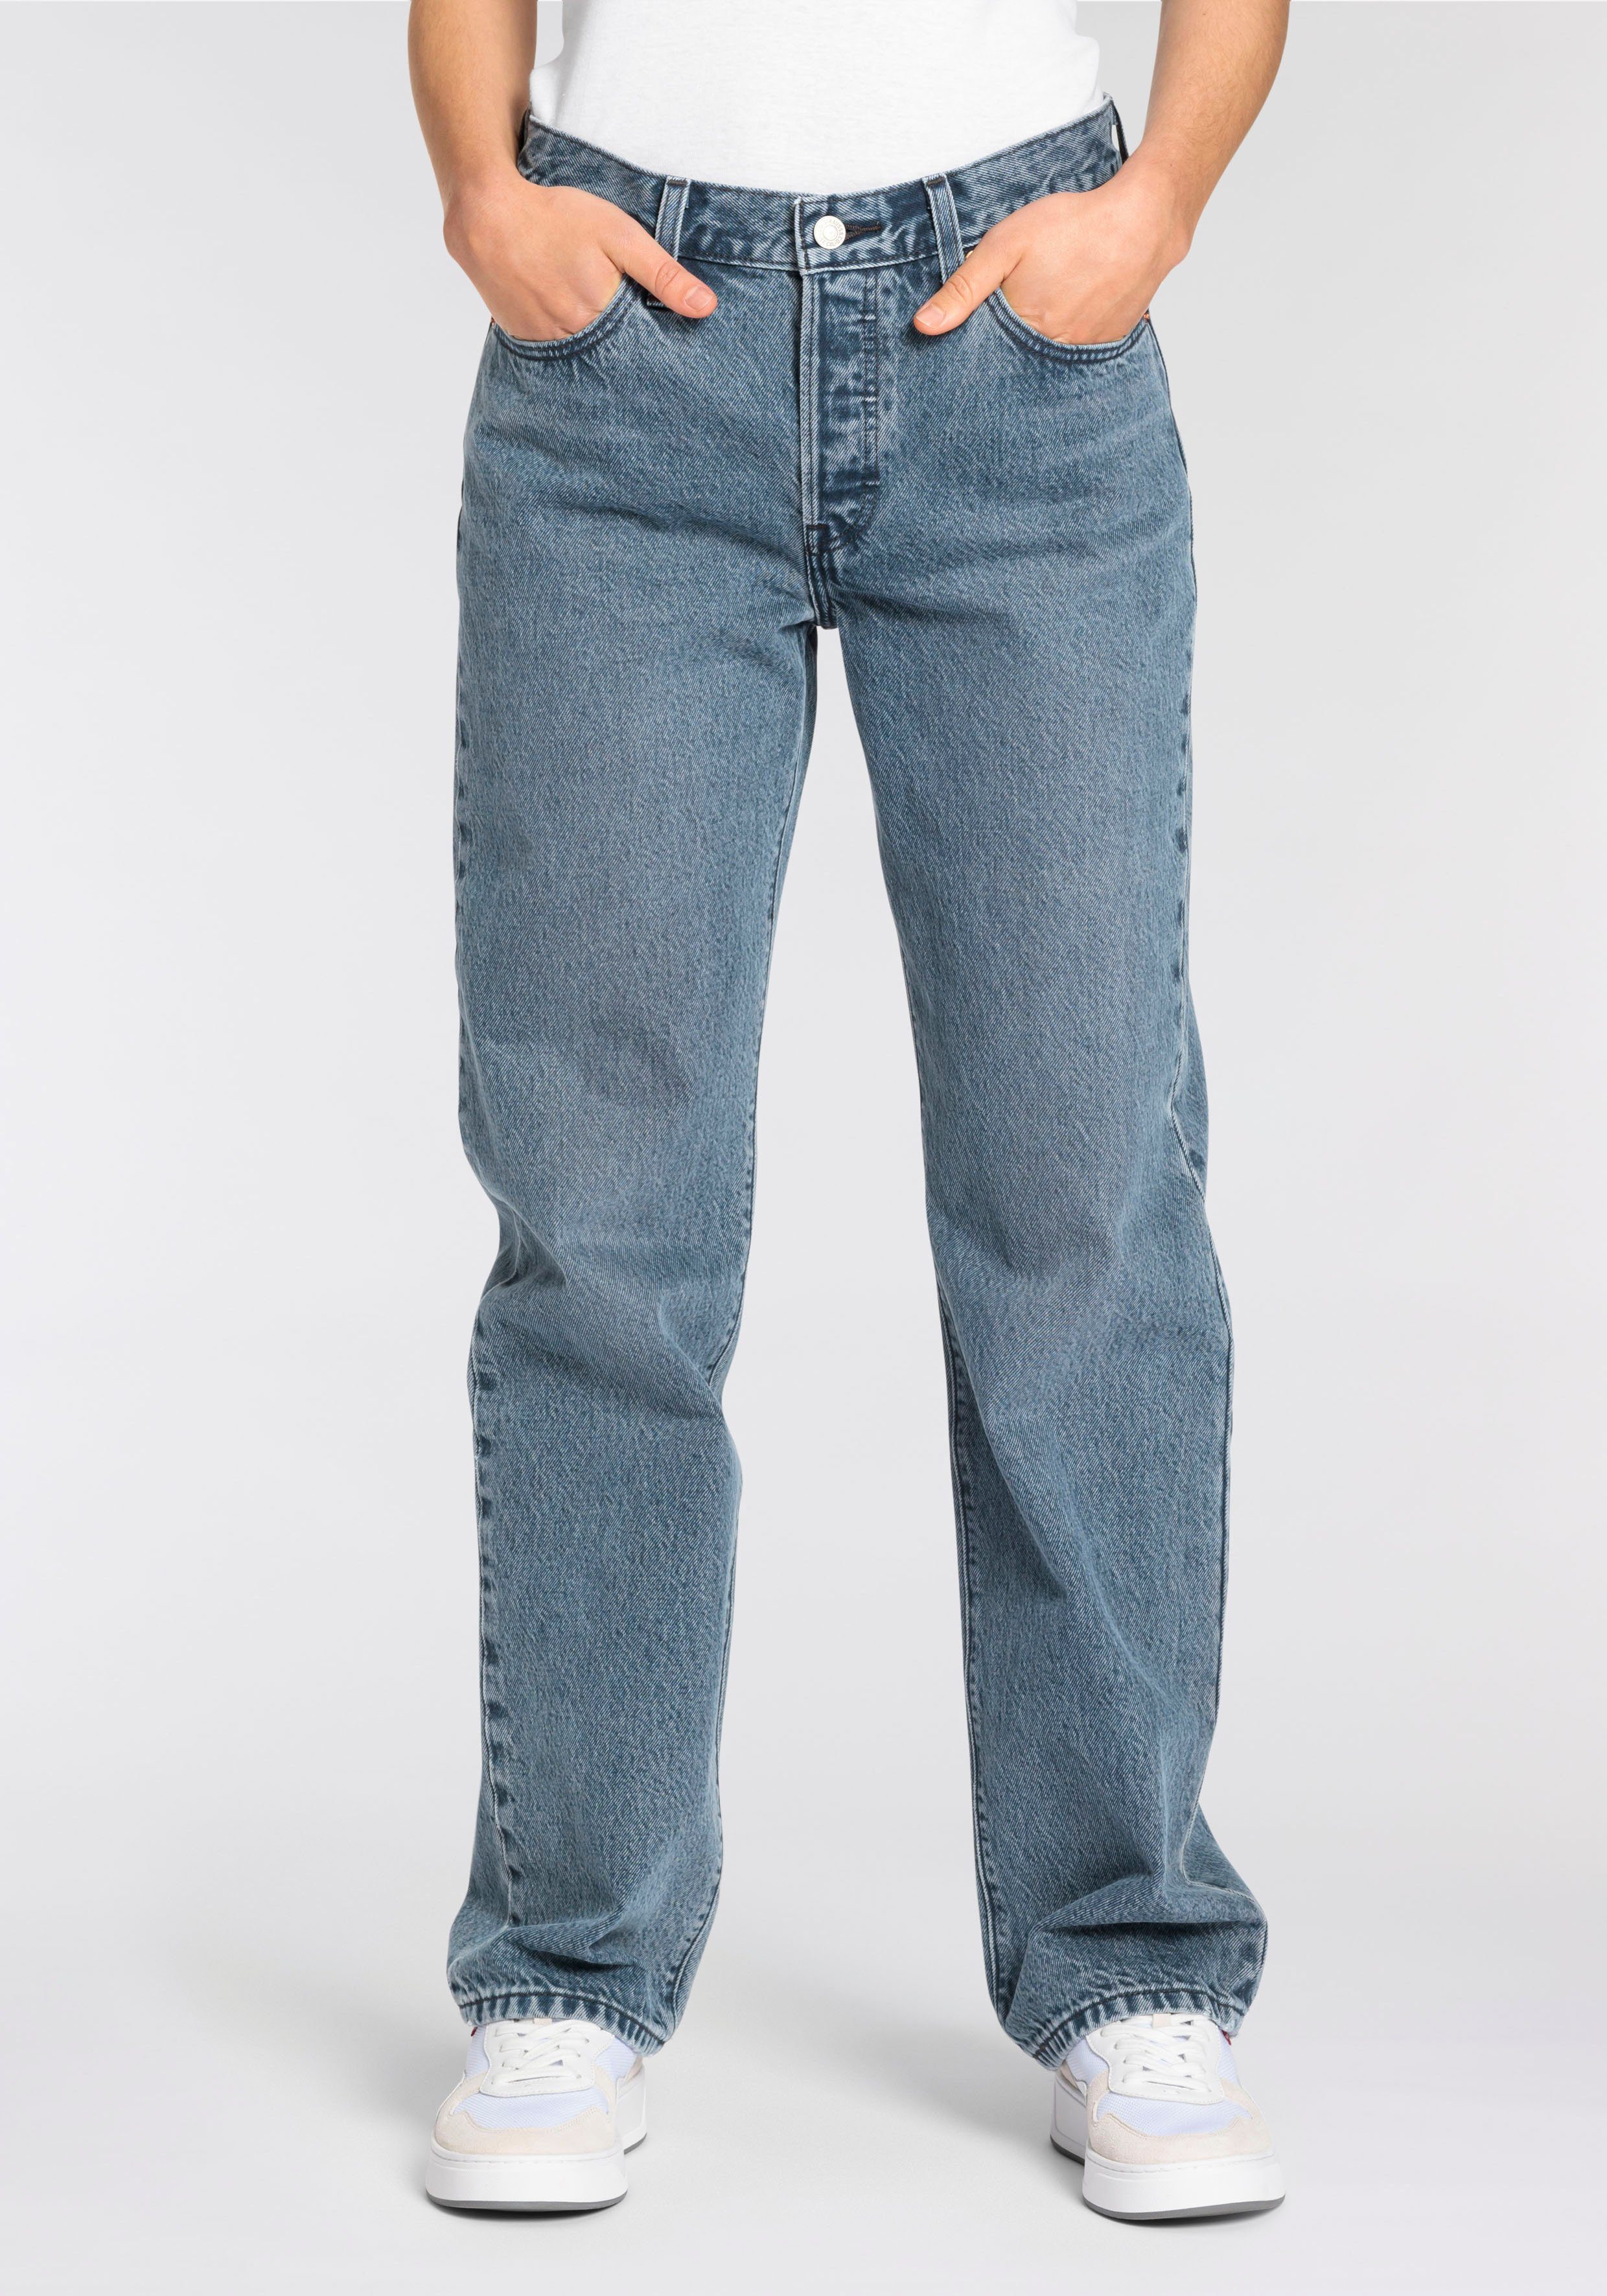 Levi's® Weite multi Collection 501 90'S denim 501 Jeans